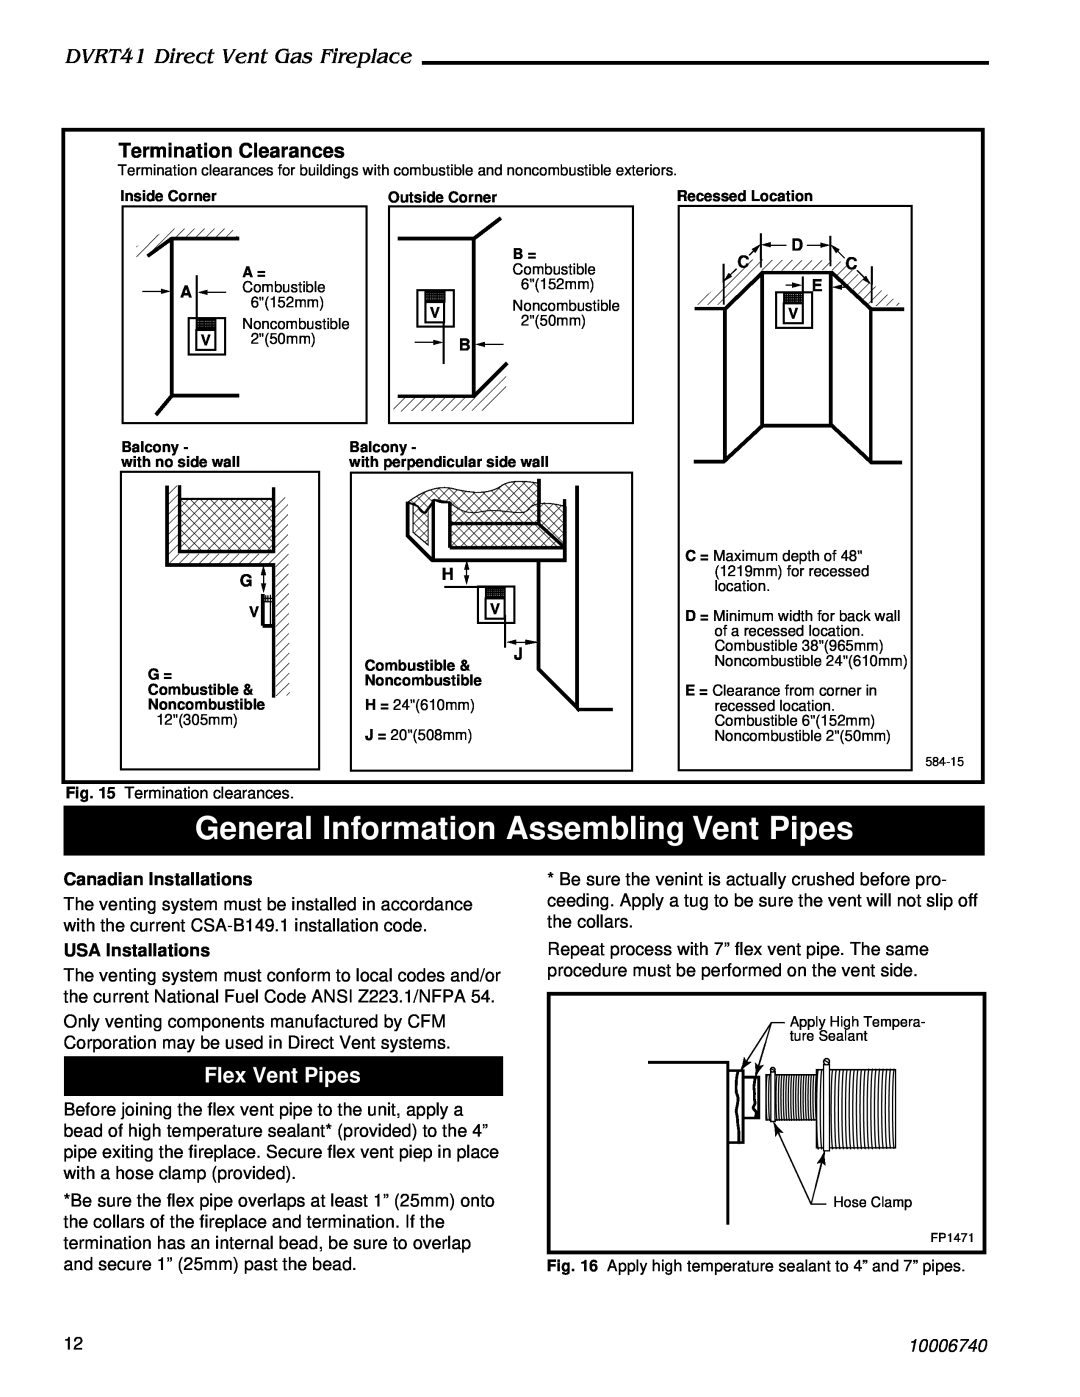 Vermont Casting General Information Assembling Vent Pipes, Flex Vent Pipes, DVRT41 Direct Vent Gas Fireplace, 10006740 